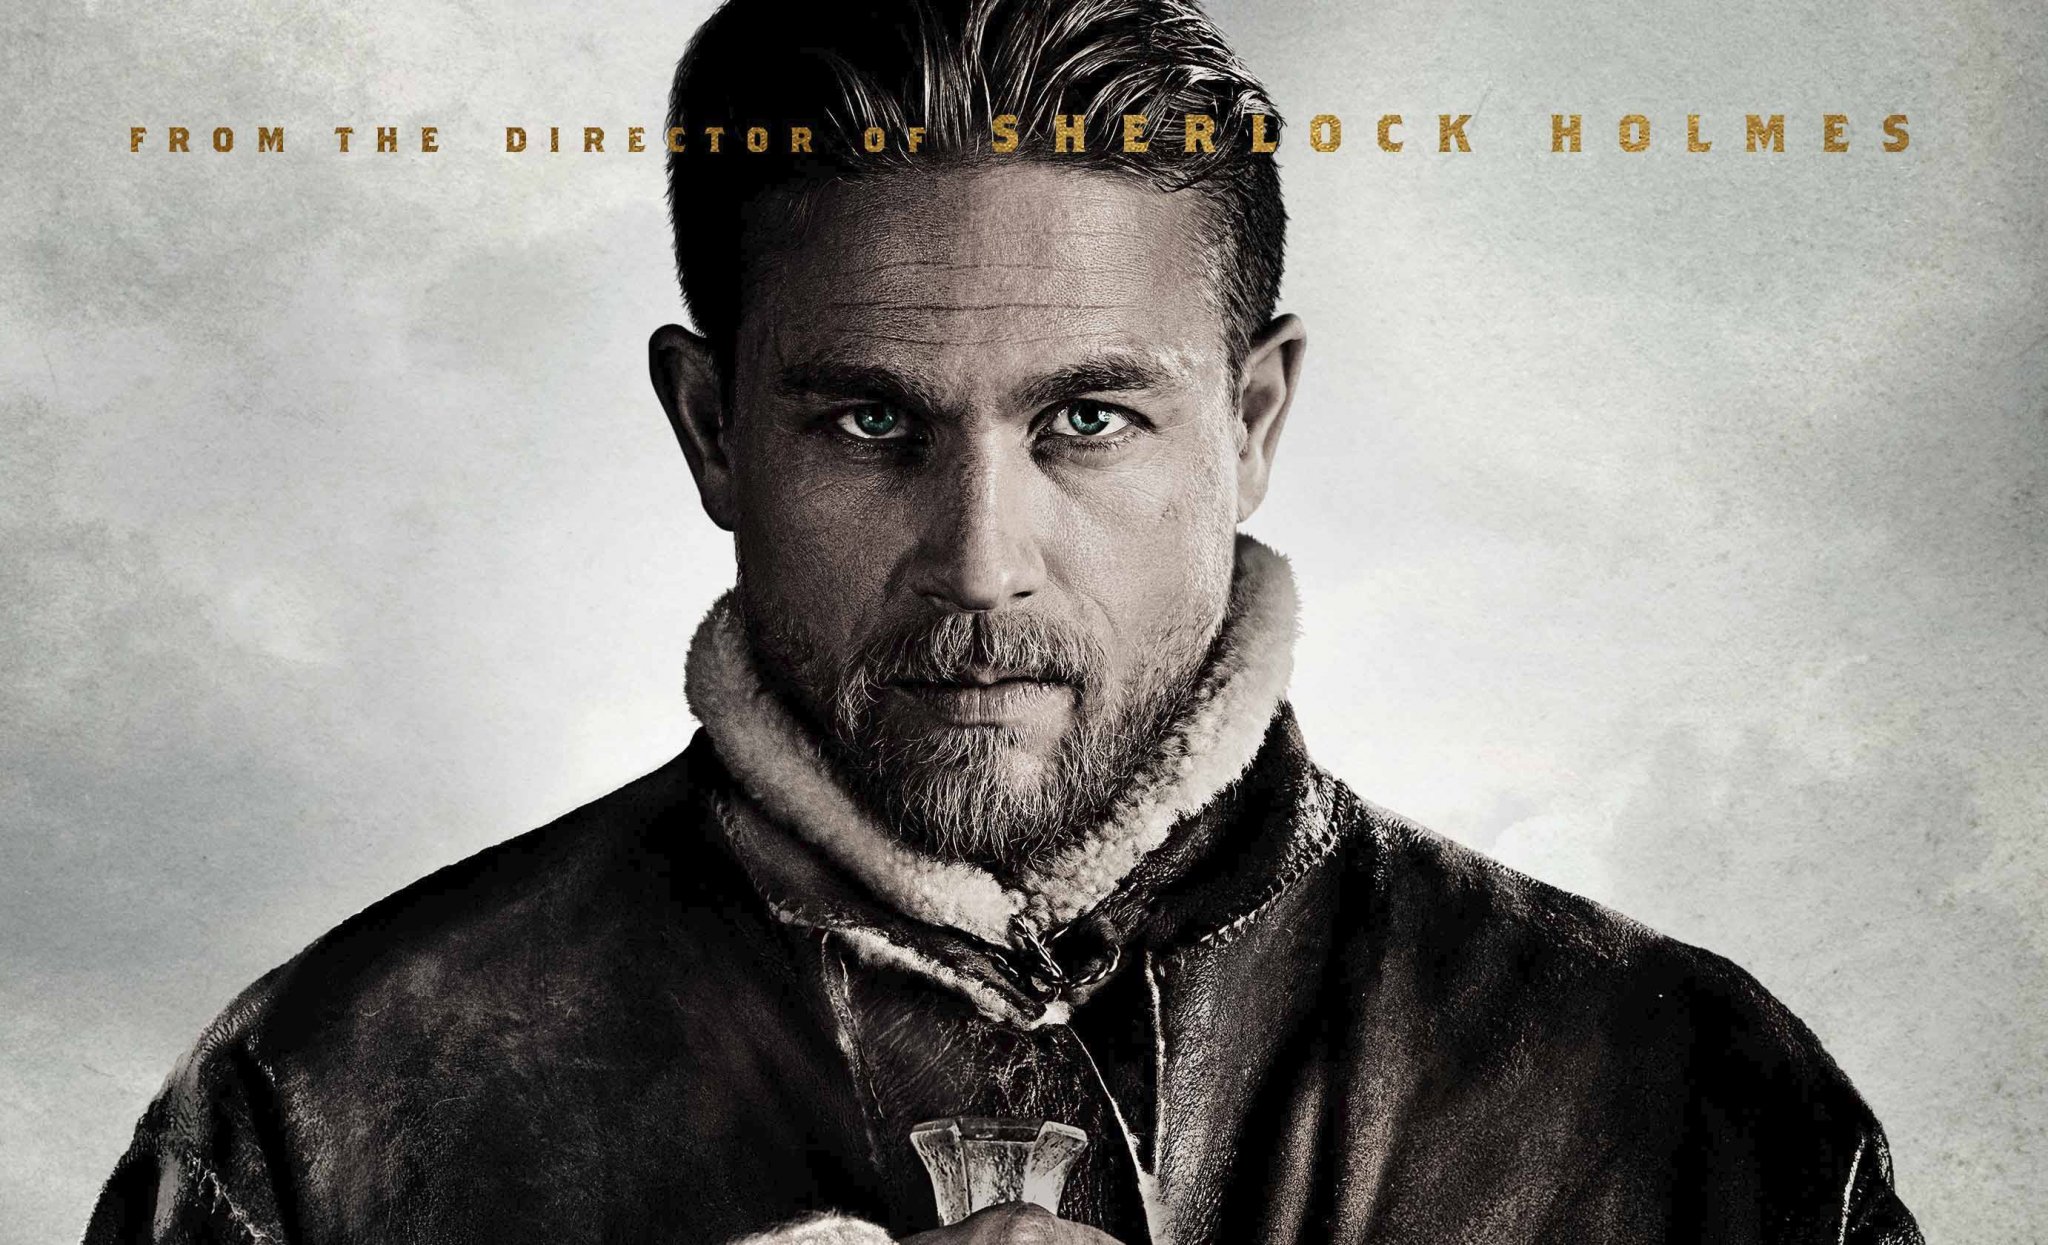 New character posters arrive for King Arthur Legend of the Sword